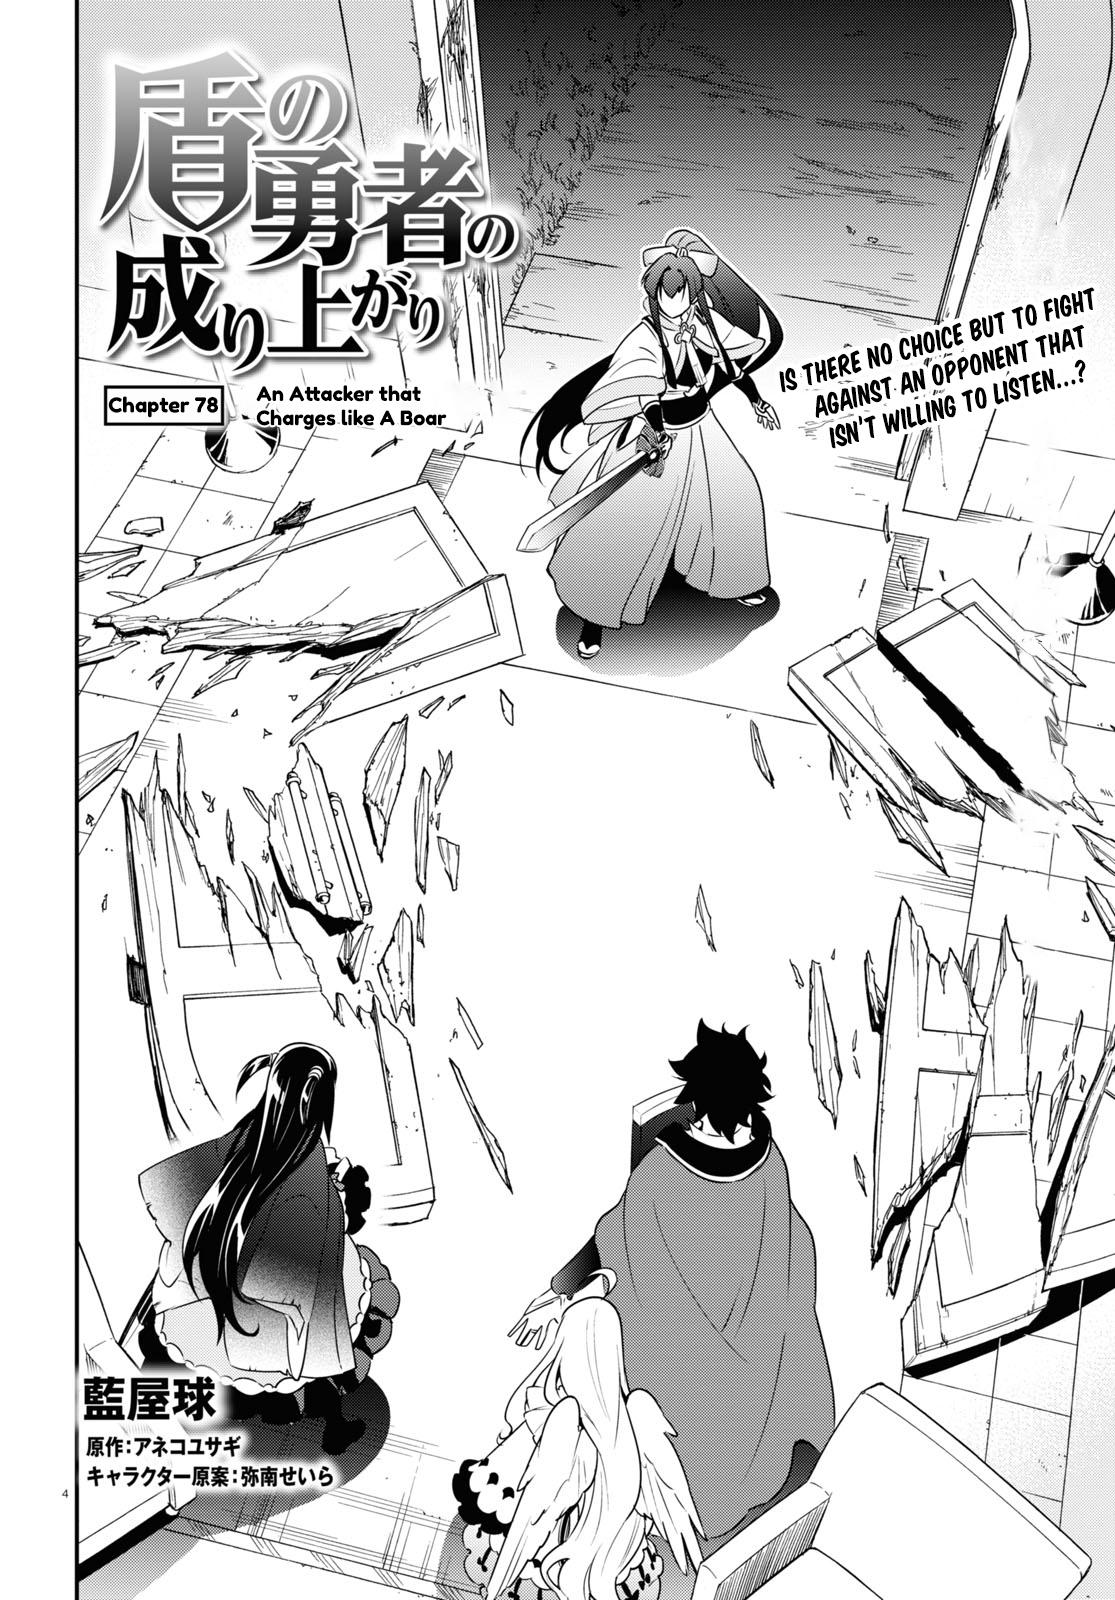 The Rising Of The Shield Hero Chapter 78, The Rising Of The Shield Hero 78, Read The Rising Of The Shield Hero Chapter 78, The Rising Of The Shield Hero Chapter 78 Manga, The Rising Of The Shield Hero Chapter 78 english, The Rising Of The Shield Hero Chapter 78 raw manga, The Rising Of The Shield Hero Chapter 78 online, The Rising Of The Shield Hero Chapter 78 high quality, The Rising Of The Shield Hero 78 chapter, The Rising Of The Shield Hero Chapter 78 manga scan